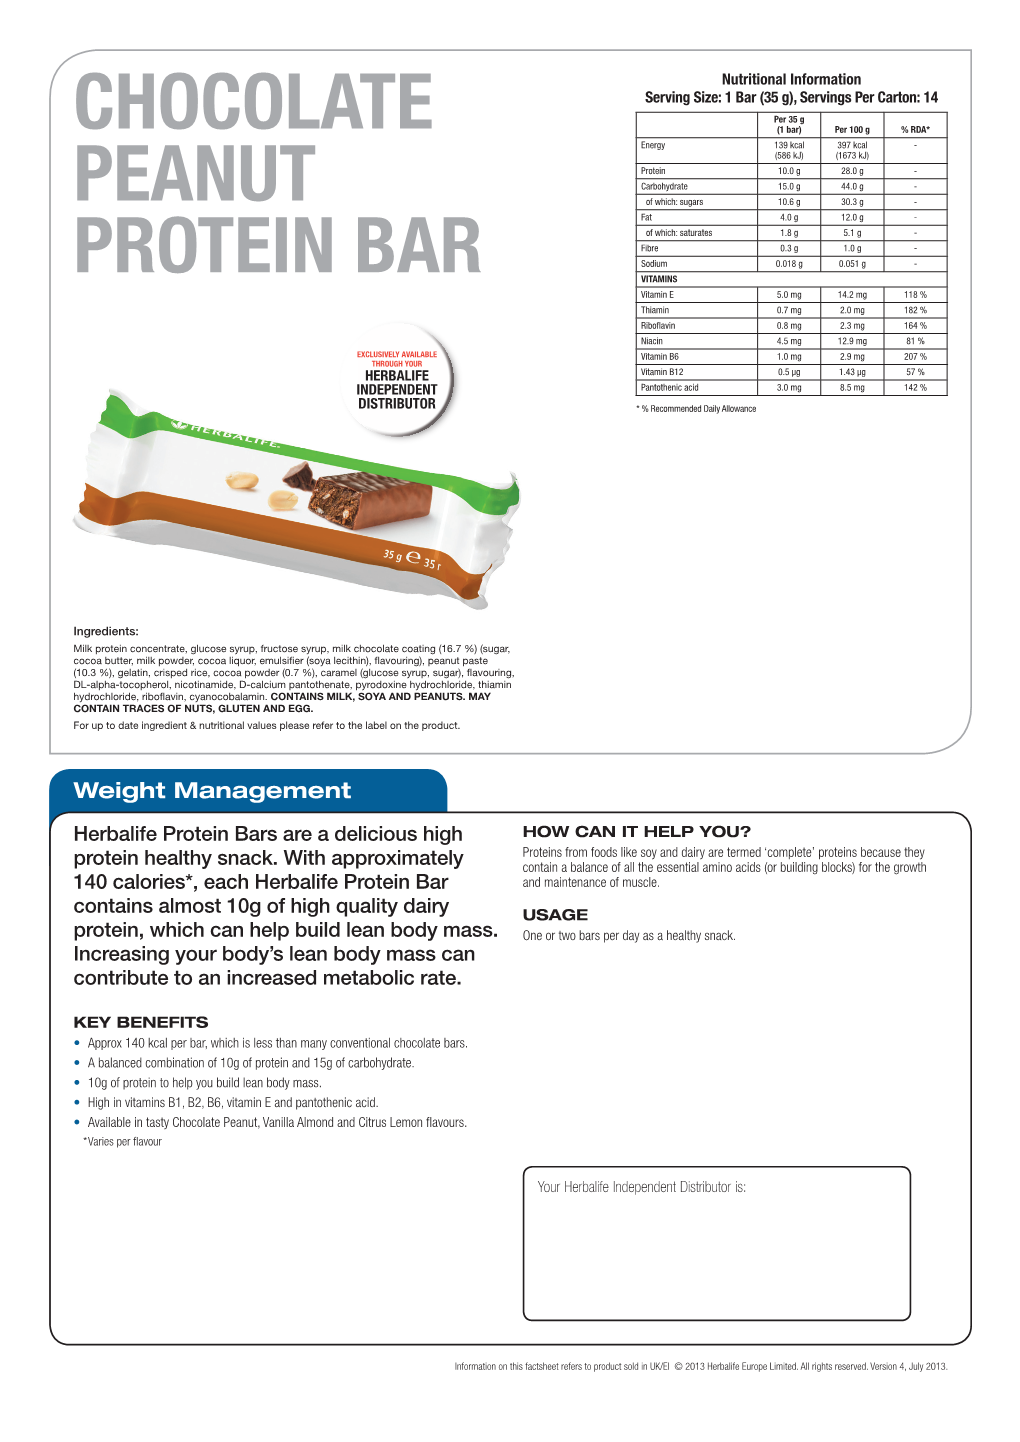 Protein Bars Are a Delicious High HOW CAN IT HELP YOU? Proteins from Foods Like Soy and Dairy Are Termed ‘Complete’ Proteins Because They Protein Healthy Snack